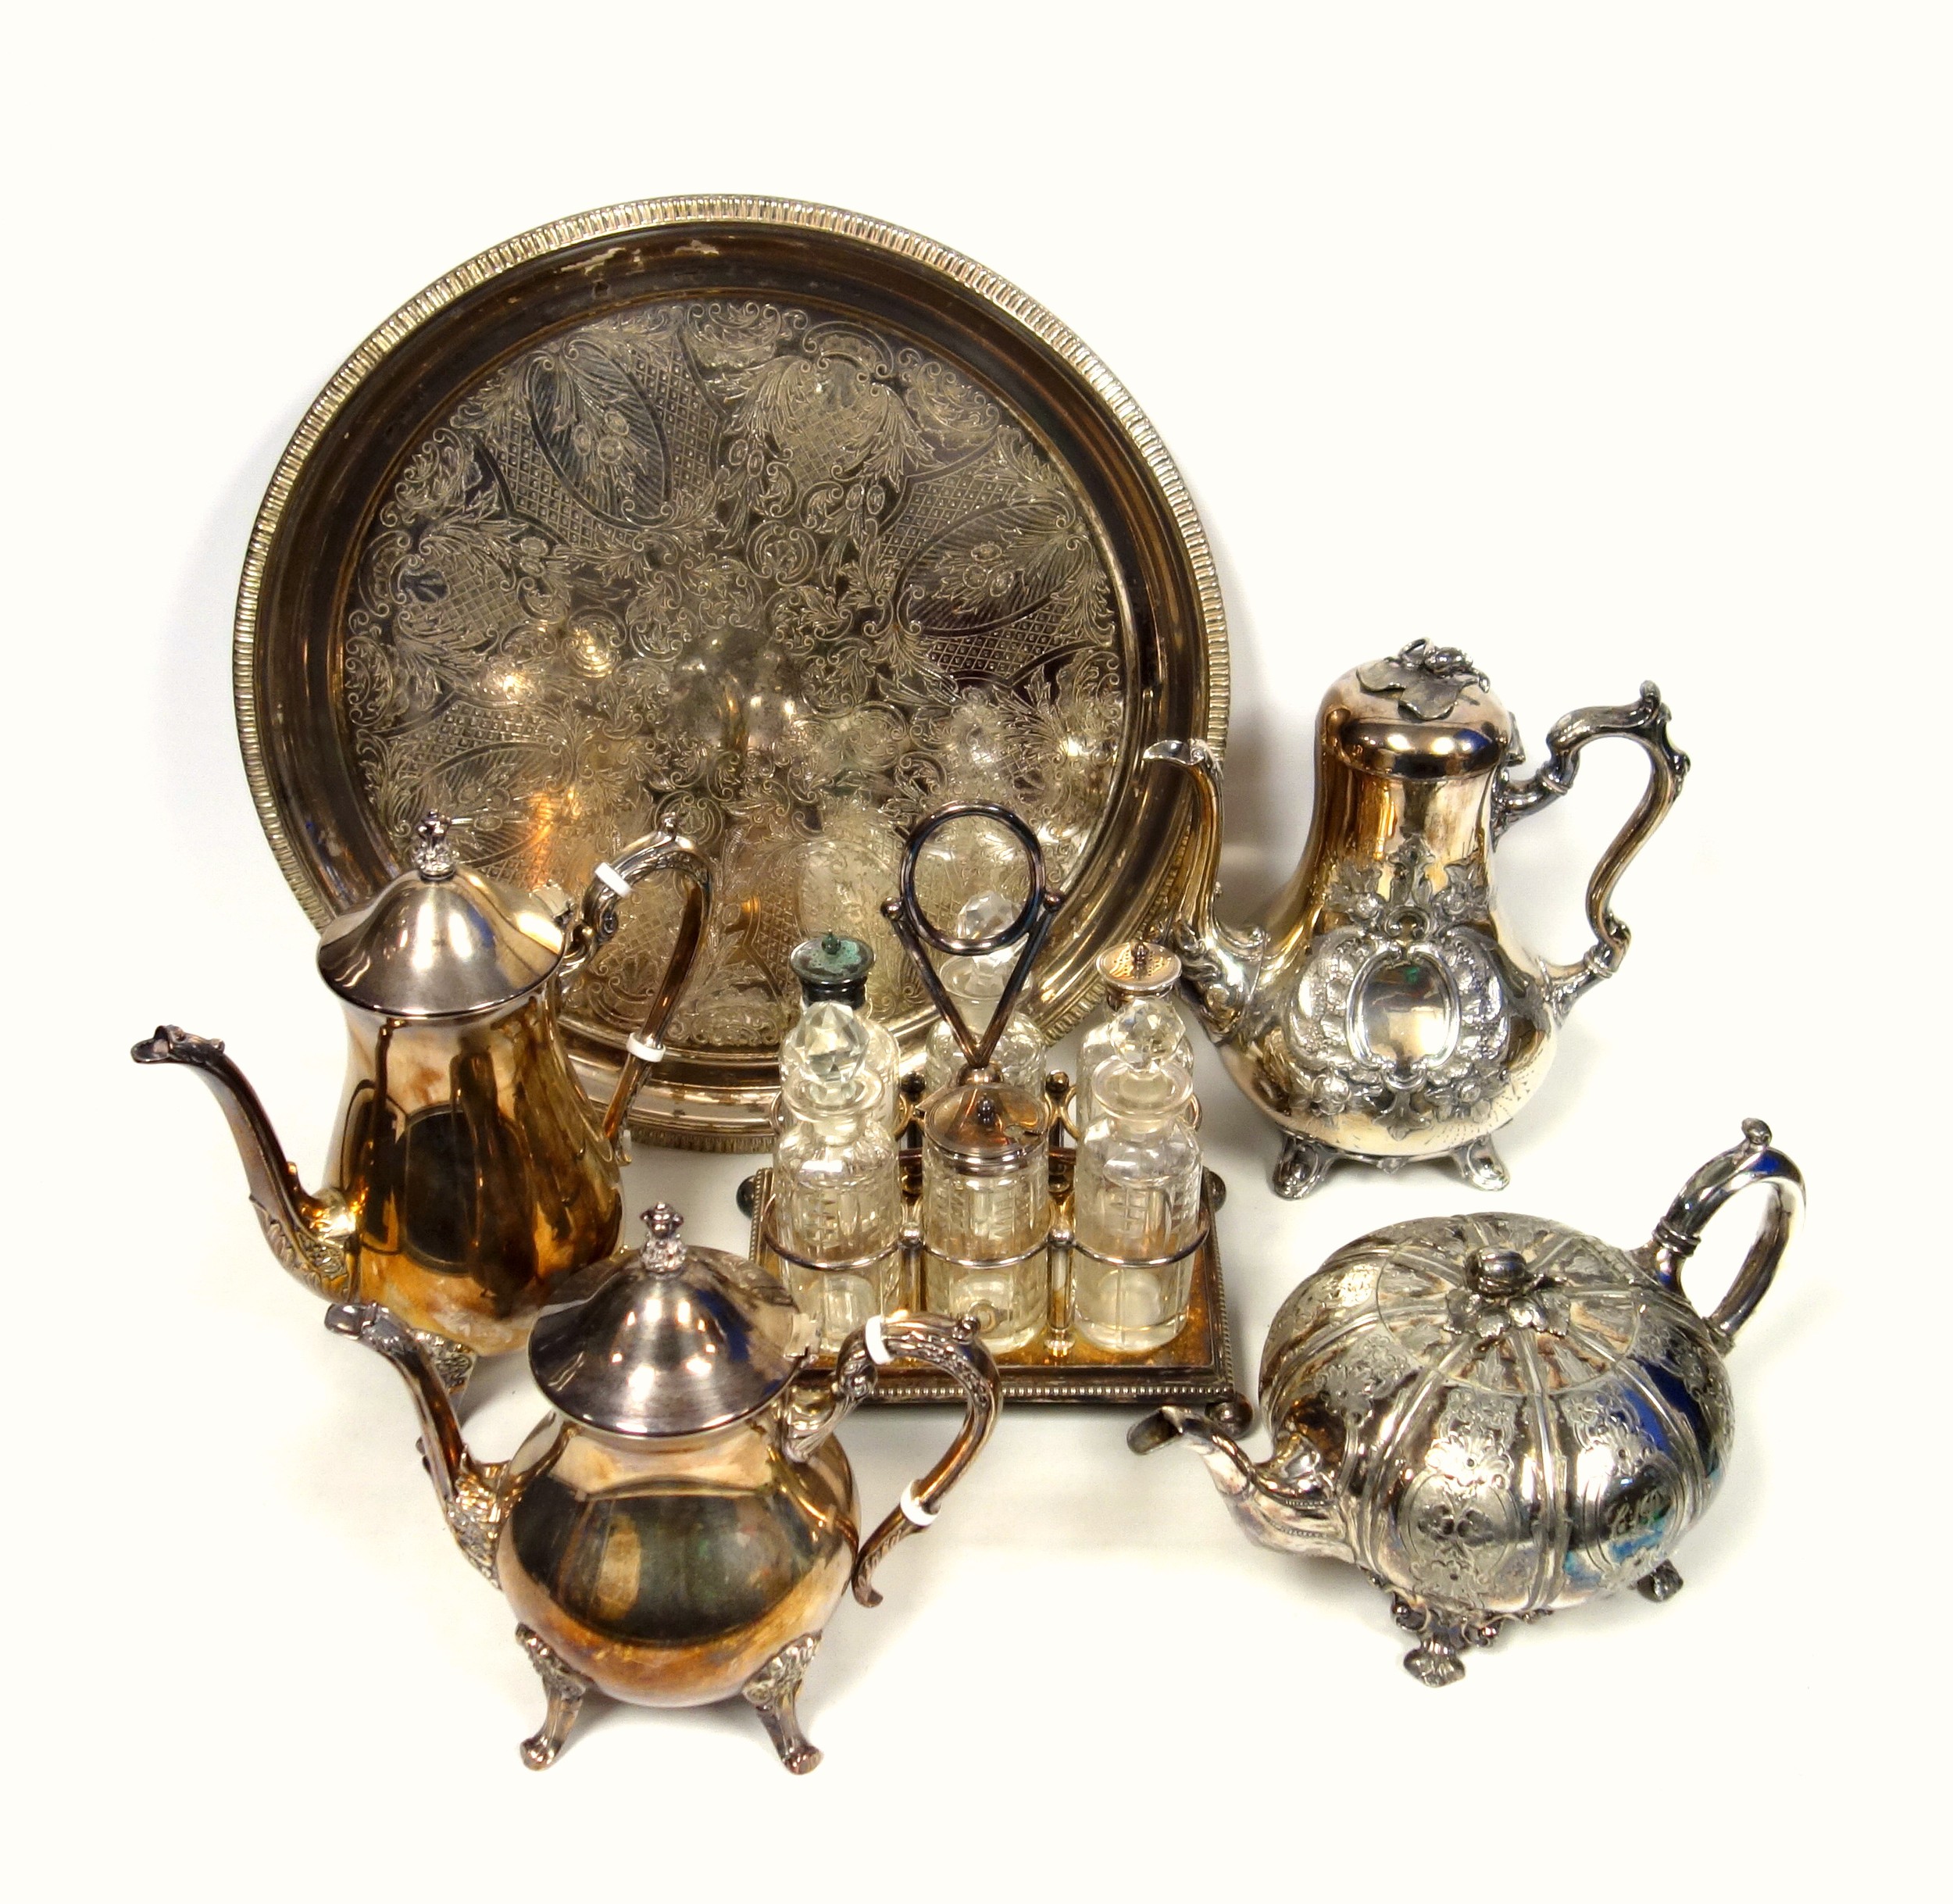 Victorian silver plated melon shaped teapot, another teapot, coffee pot, 4 piece tea and coffee set, - Image 2 of 6